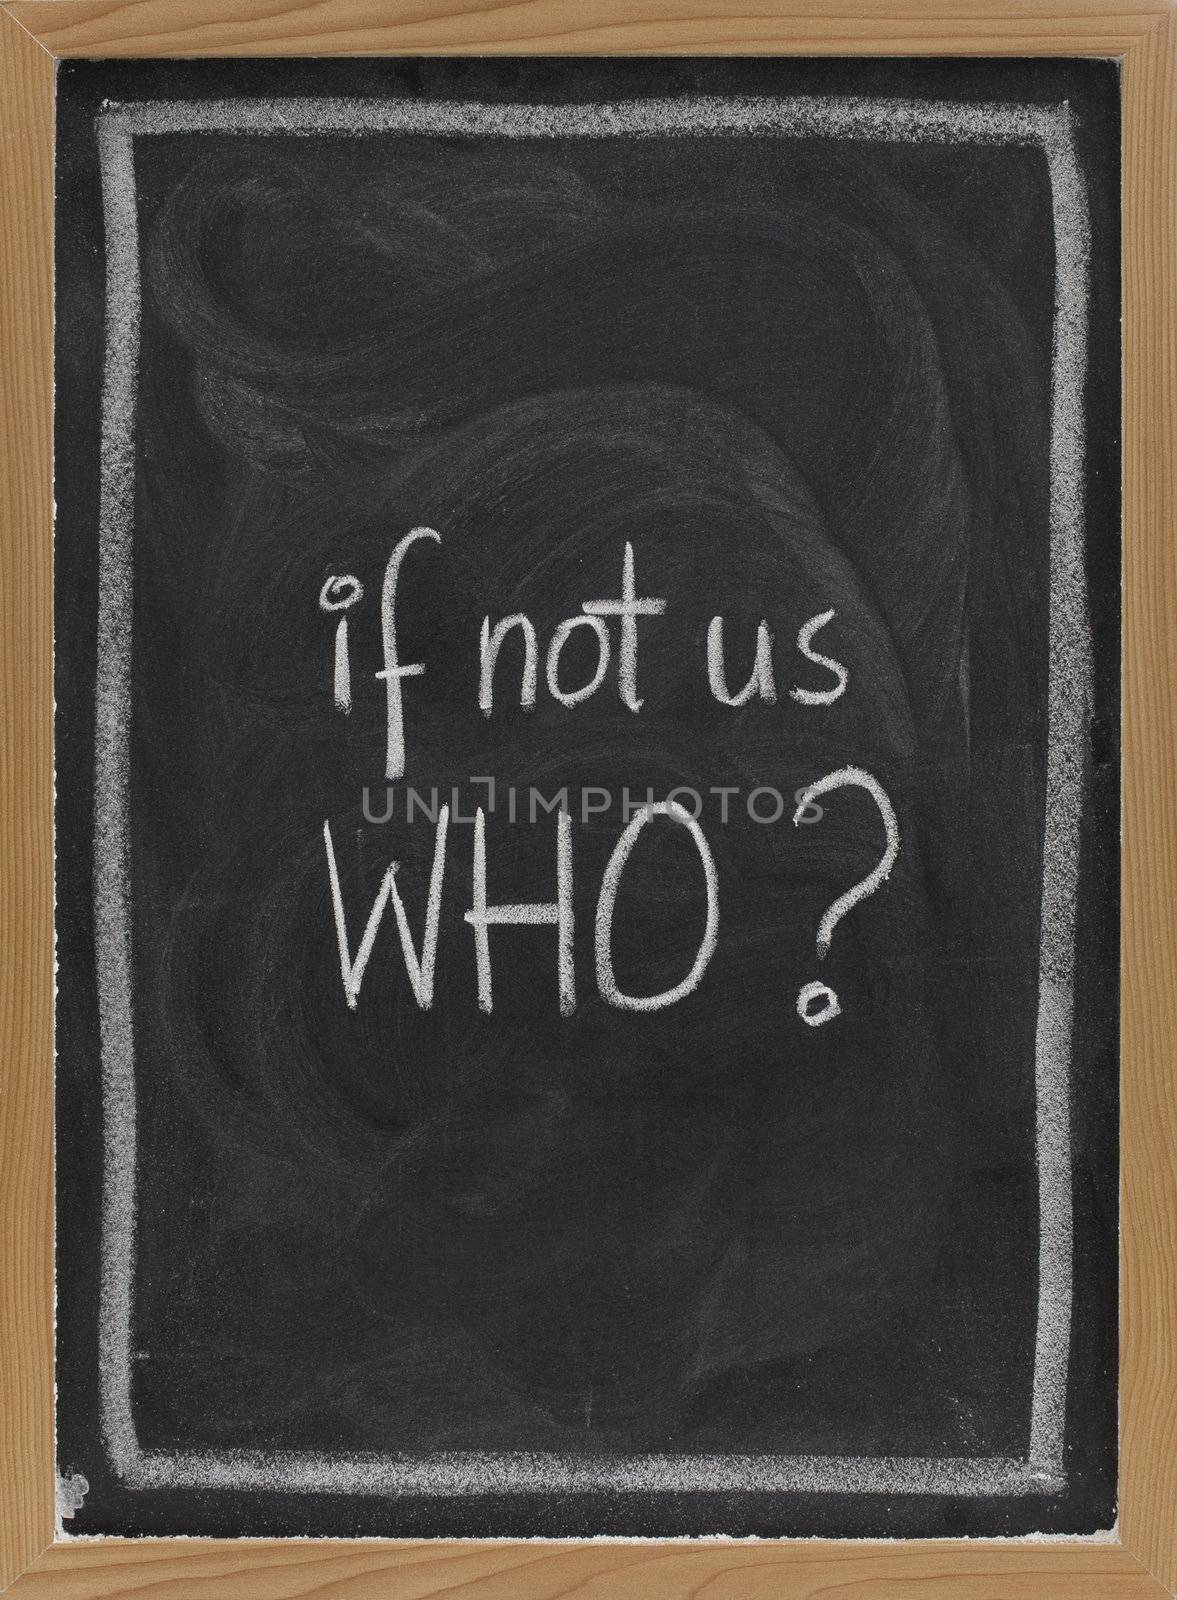 if not us, who - question handwritten with white chalk on blackboard, eraser smudge patterns